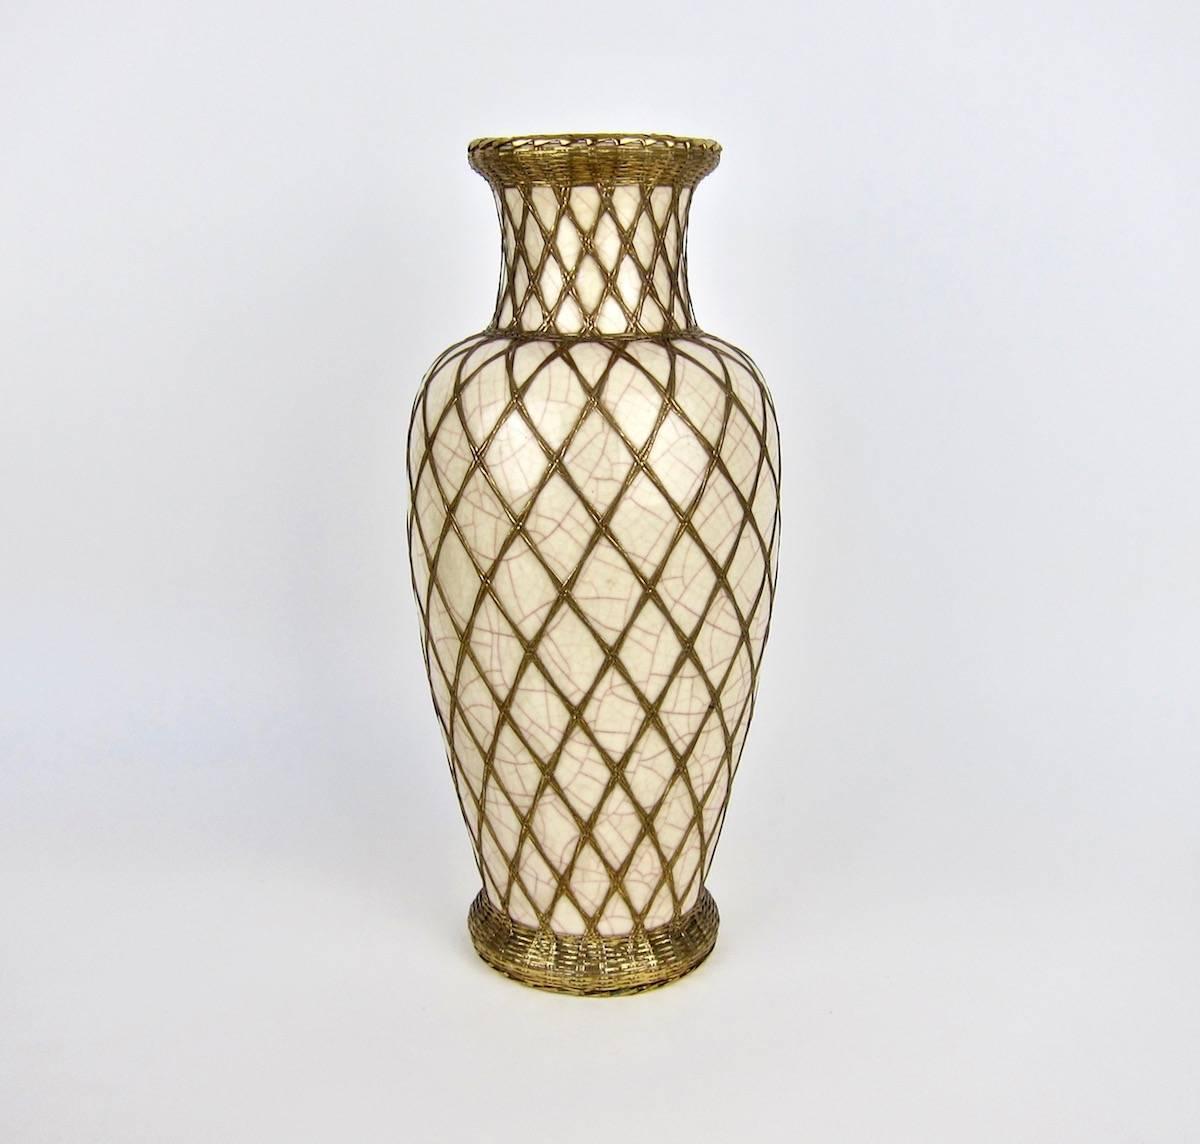 Anglo-Japanese Large Japanese Pottery Vase with Craquelure Glaze and Basket Weave Overlay